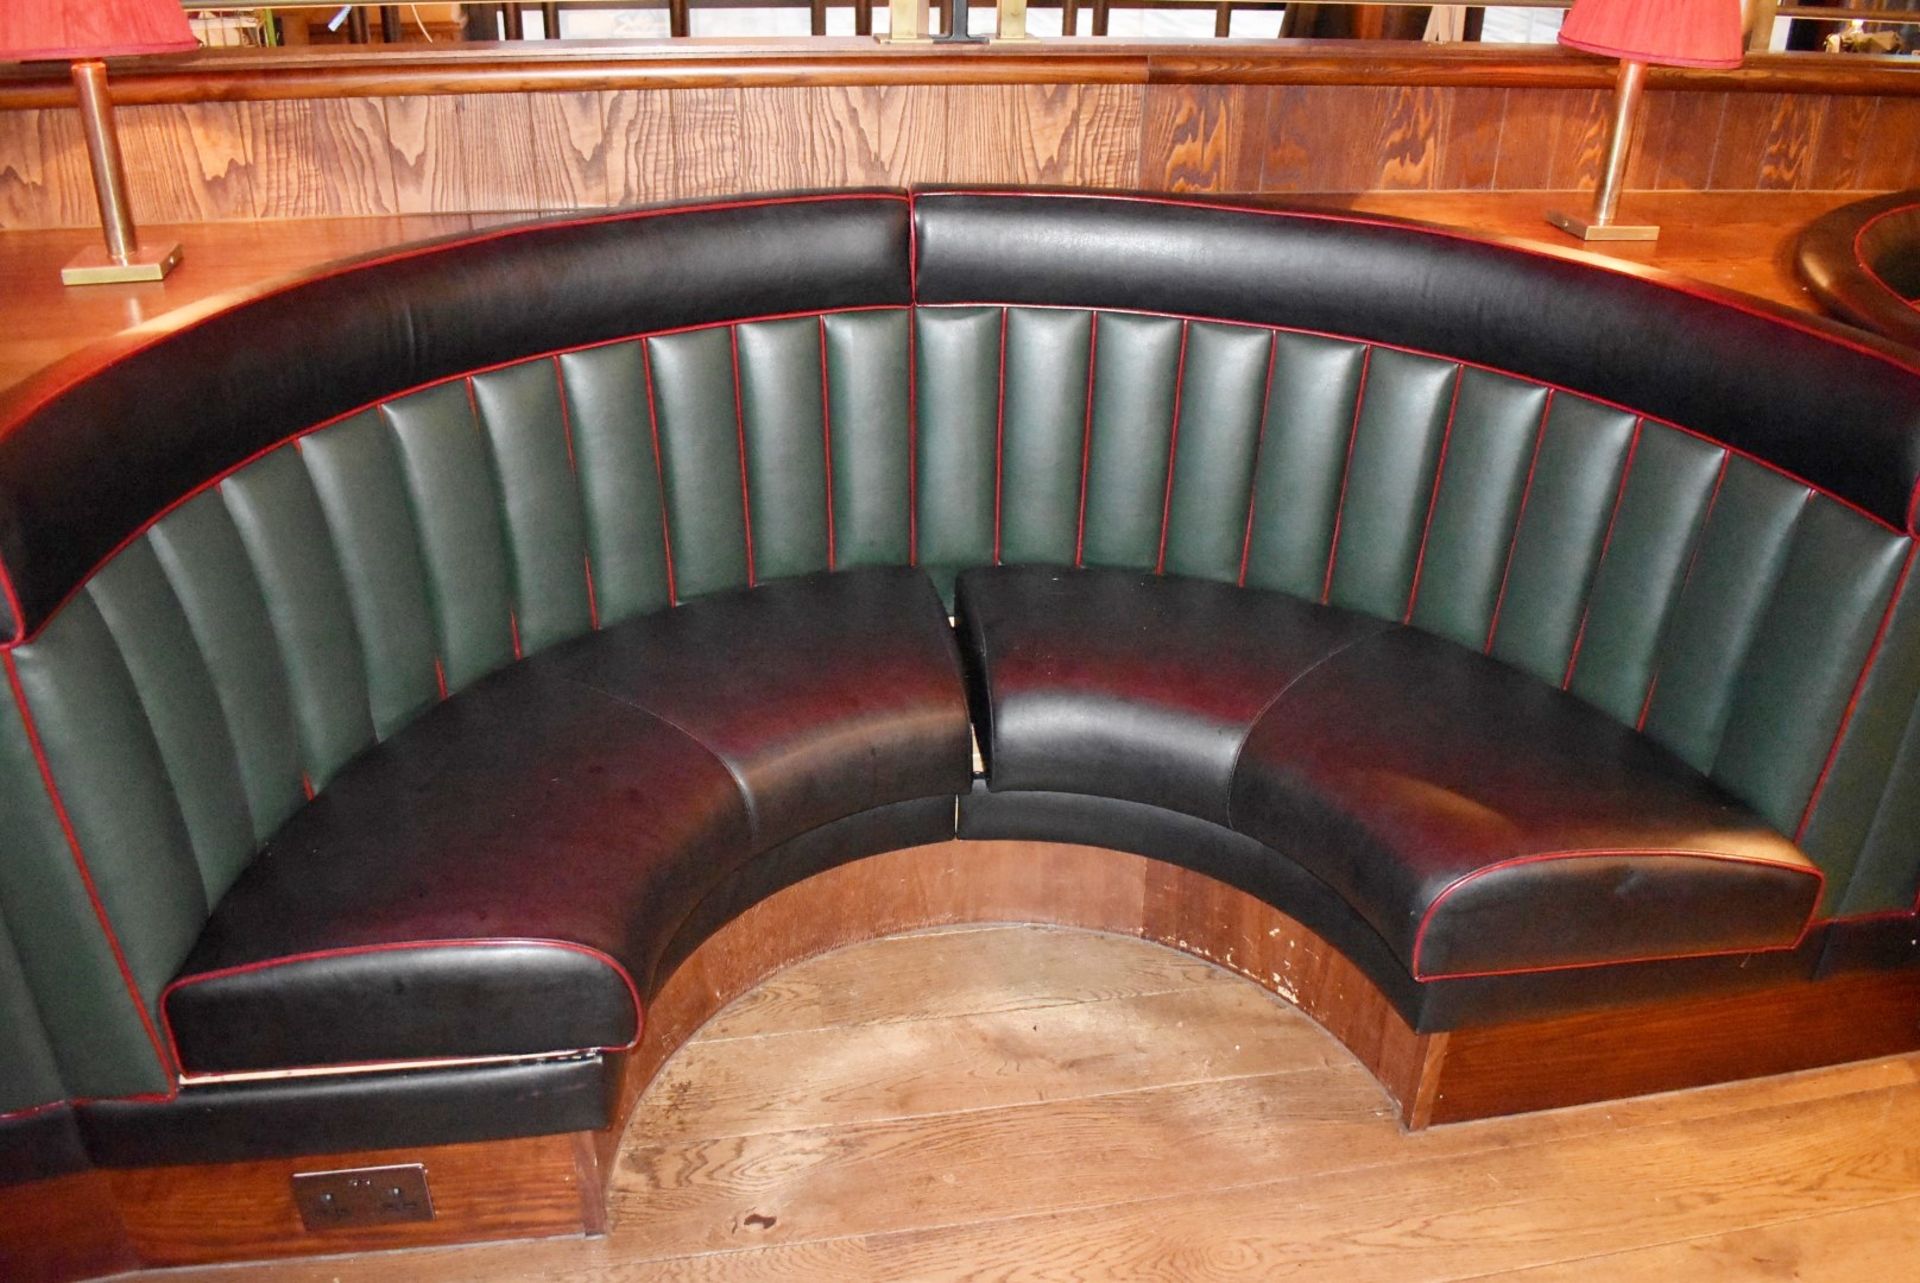 1 x Restaurant C-Shape 4 Person Seating Booth - Green and Black Vertical Fluted Back Upholstery - Image 4 of 4